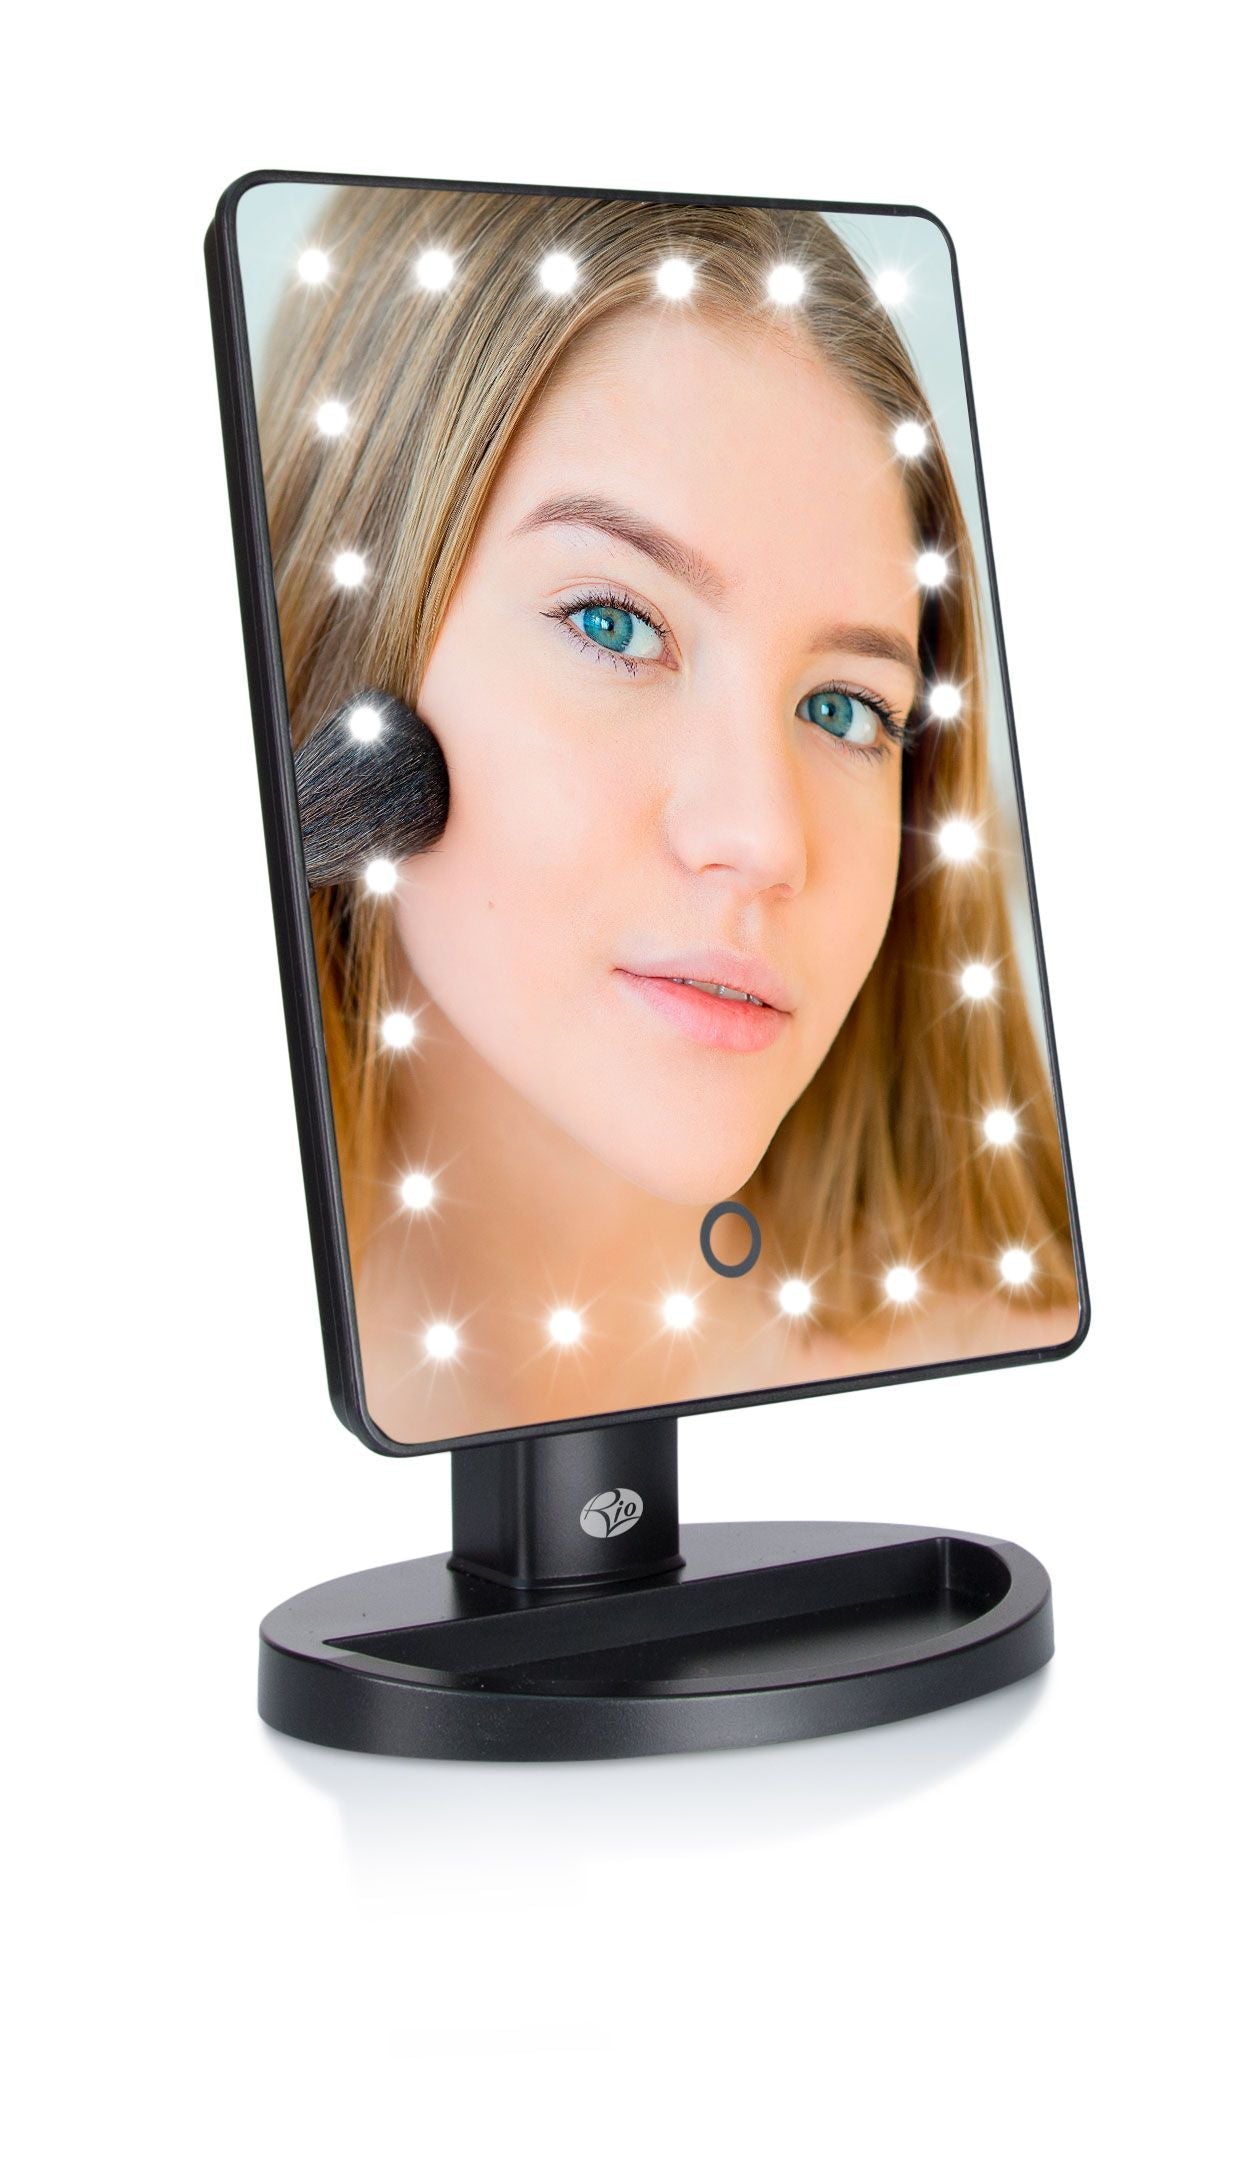 24 LED touch dimmable make up mirror with LED light illuminated and showing reflection of girls face applying make up 